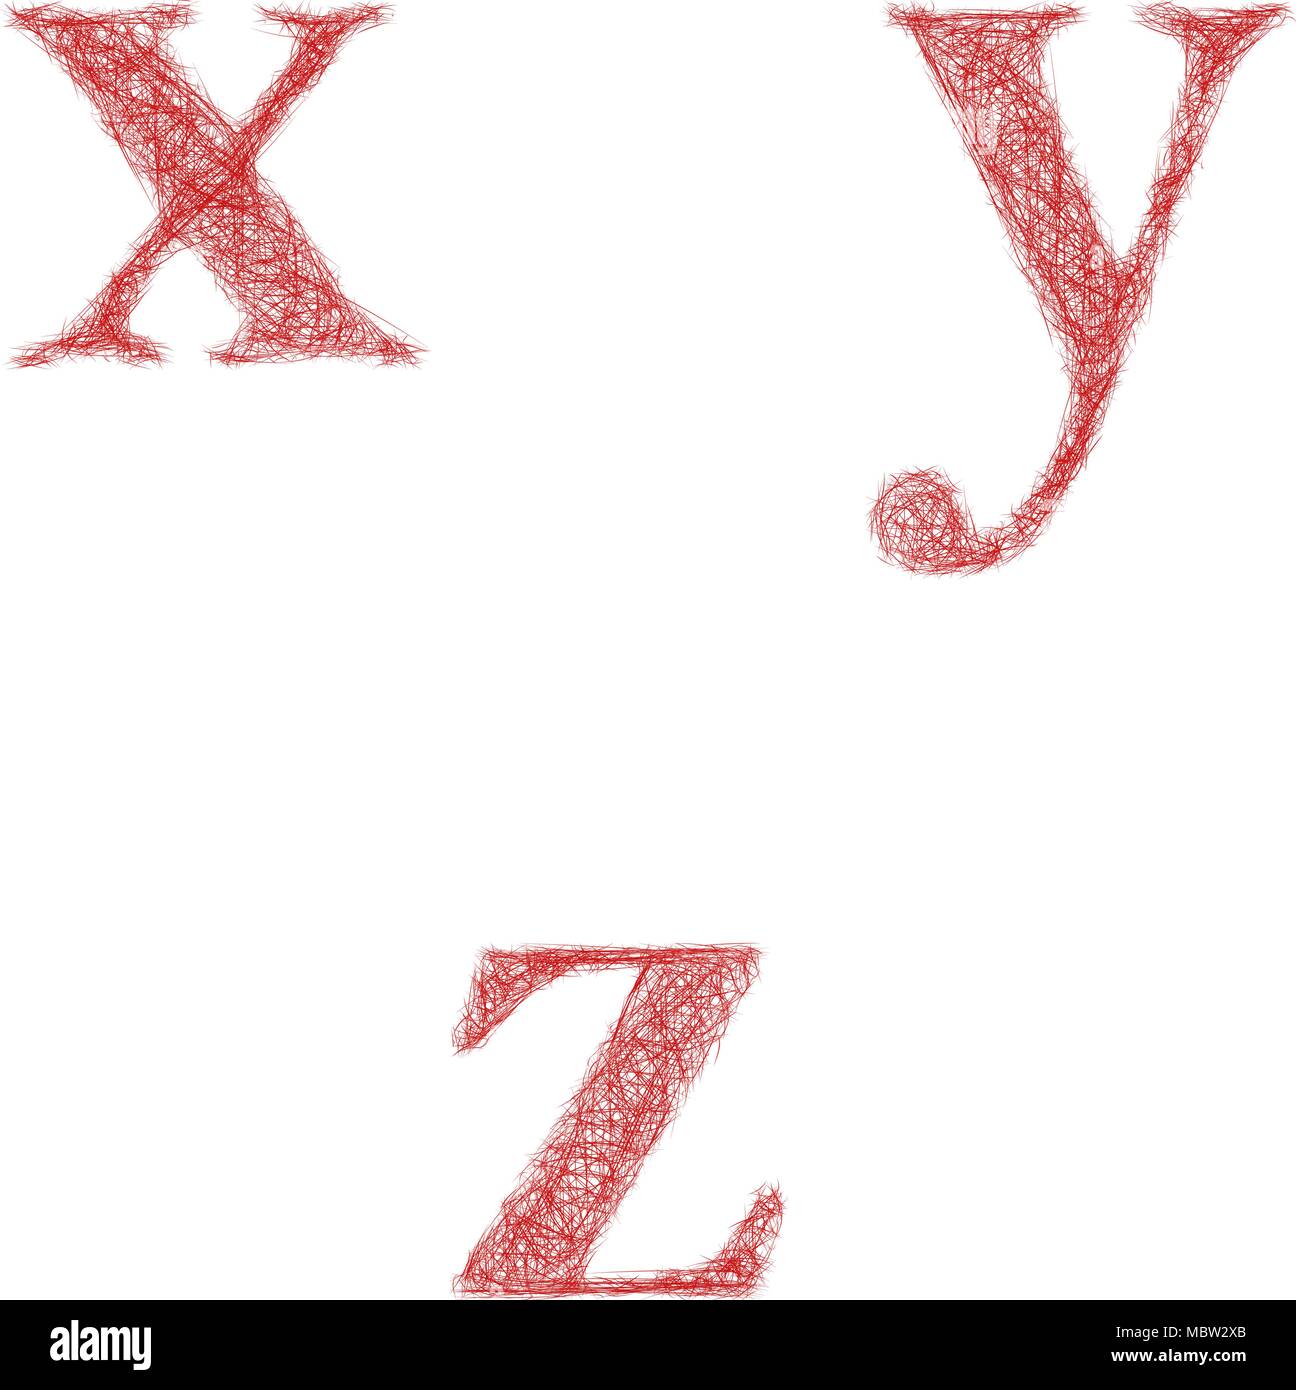 Red sketch font set - lowercase letters x, y, z Stock Vector